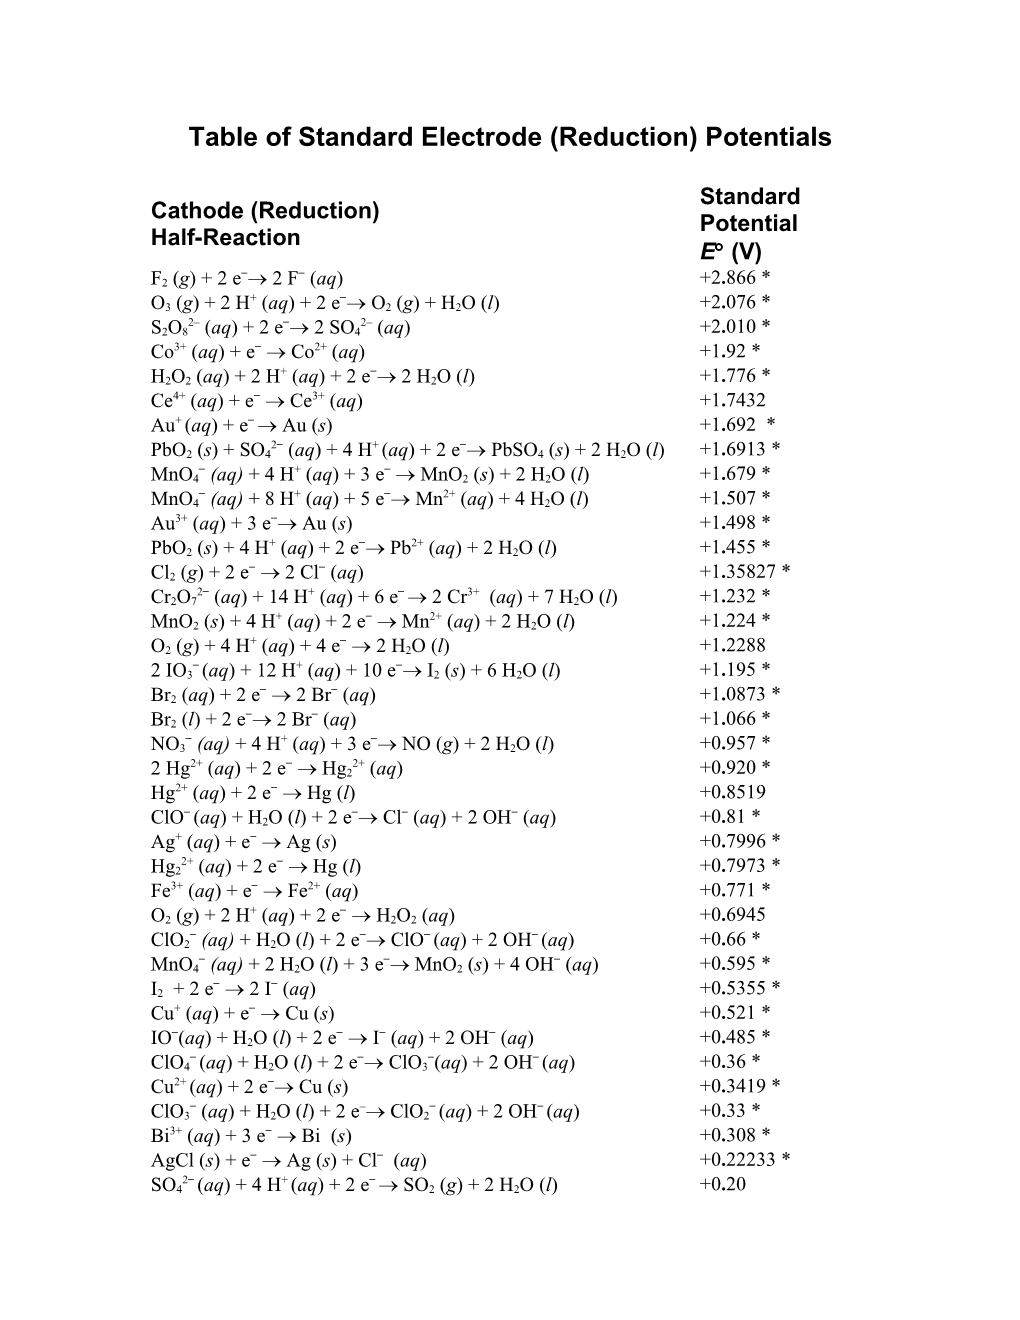 Table of Standard Electrode Potentials